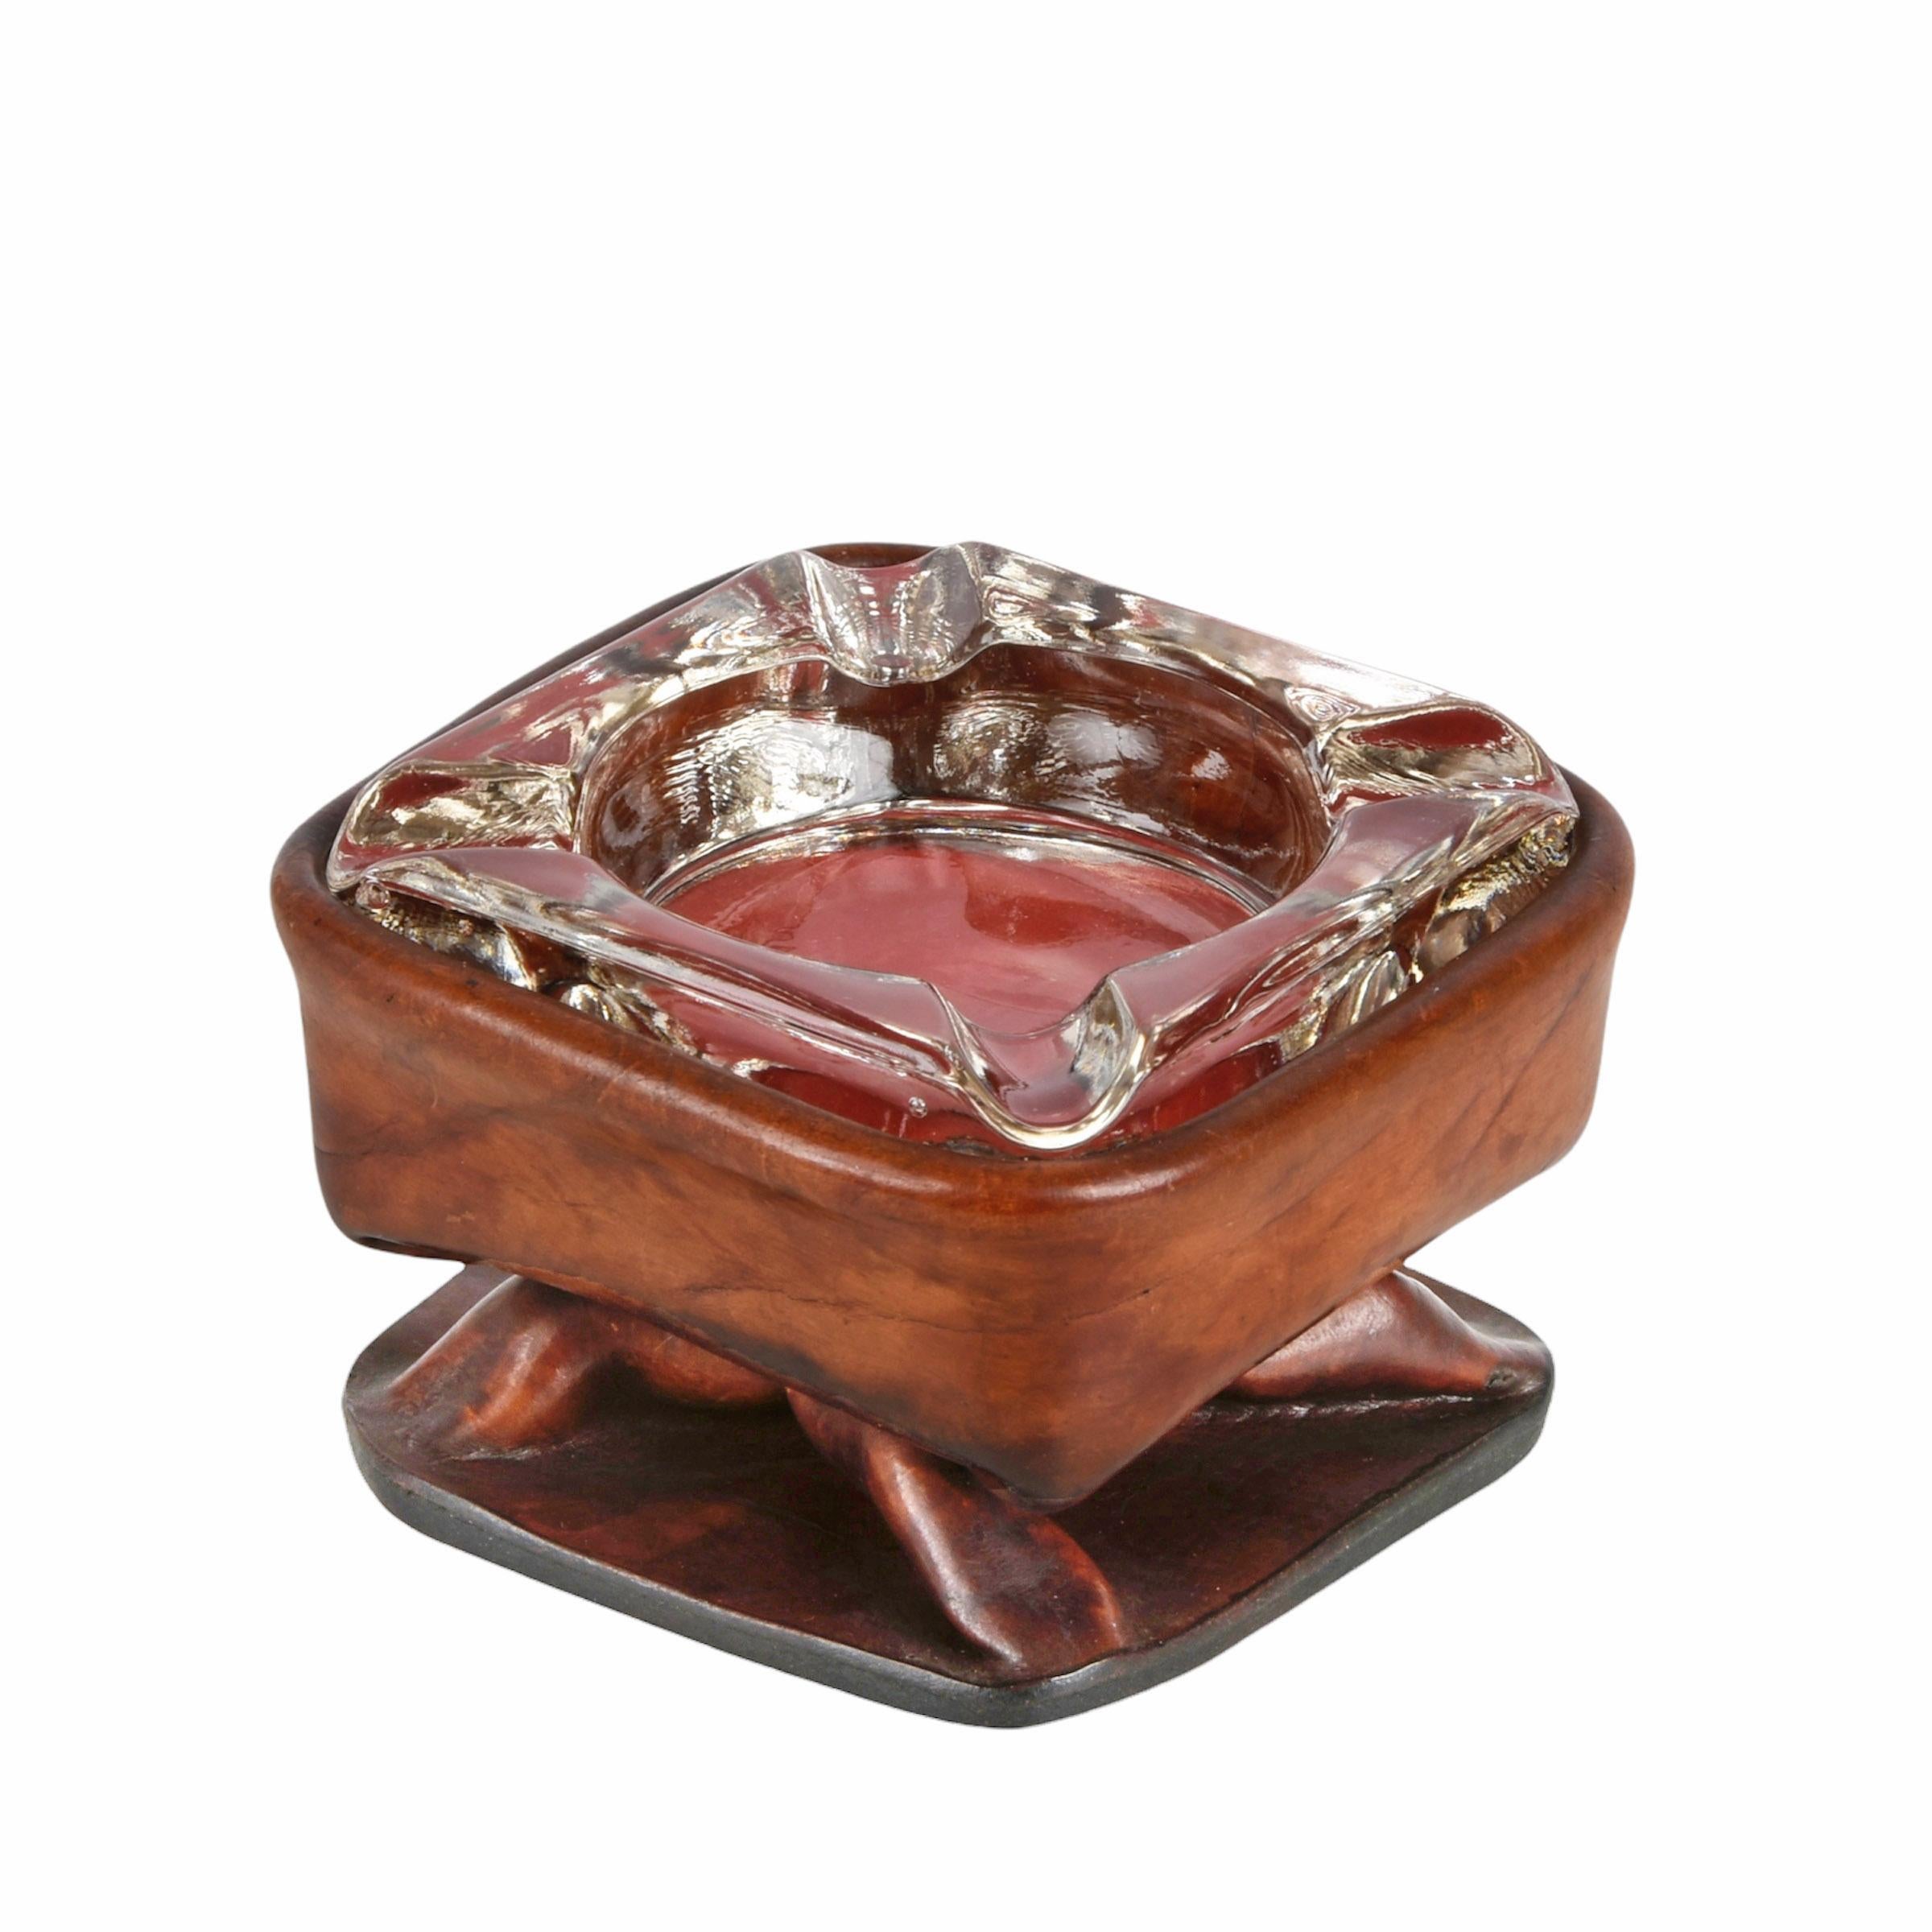 Superb ashtray with a leather body and glass top. This fantastic item is attributed to Jacques Adnet and was produced in France during the 1950s.

The unique element of this magnificent piece is the shape of the leather structure, similar to a